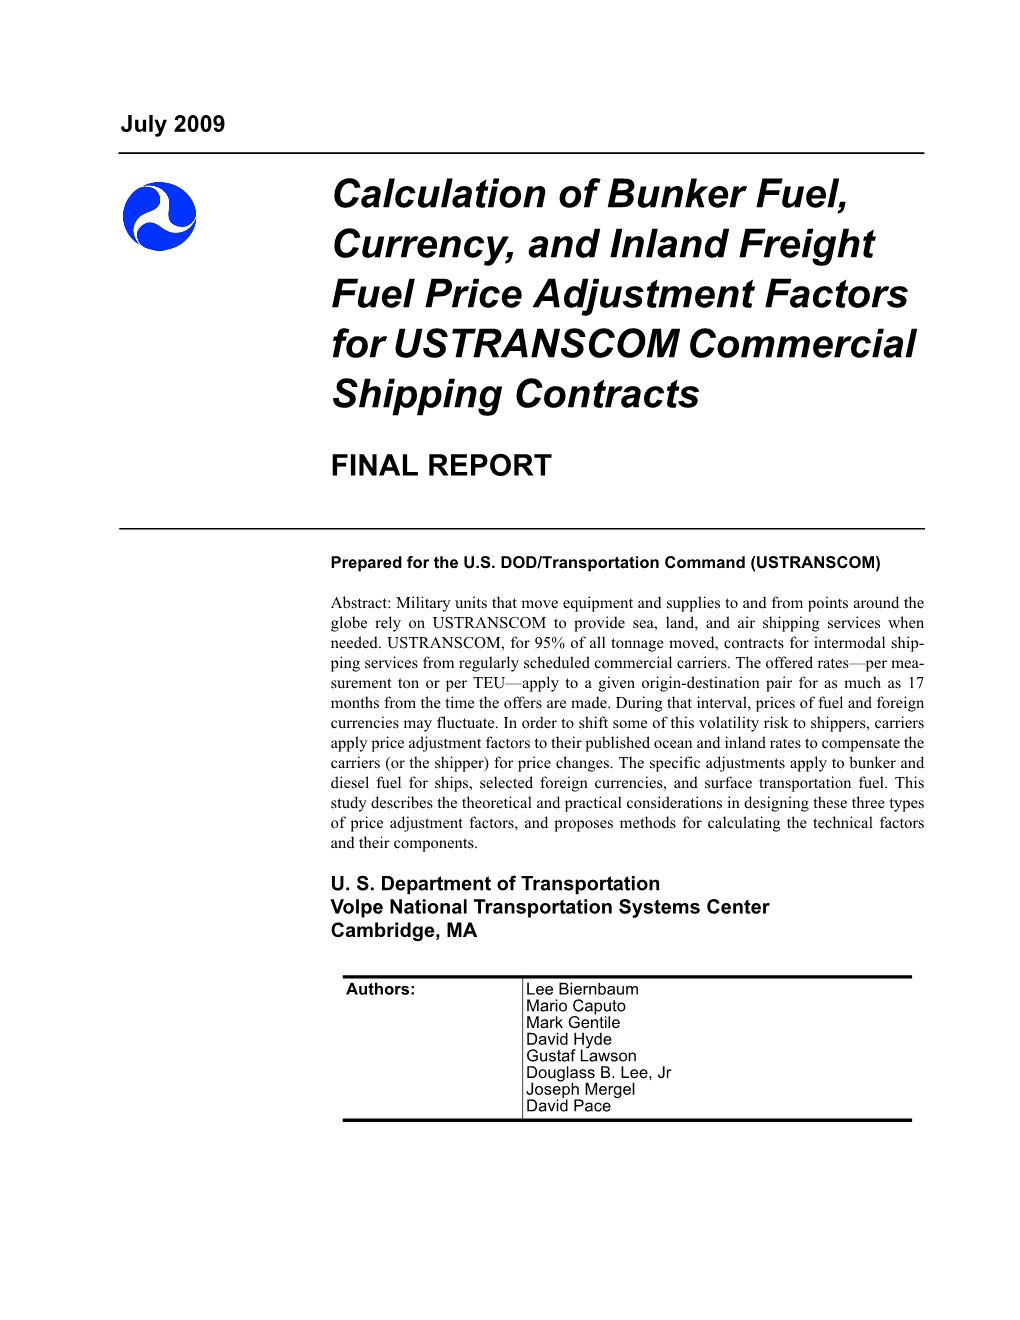 Calculation of Bunker Fuel, Currency, and Inland Freight Fuel Price Adjustment Factors for USTRANSCOM Commercial Shipping Contracts